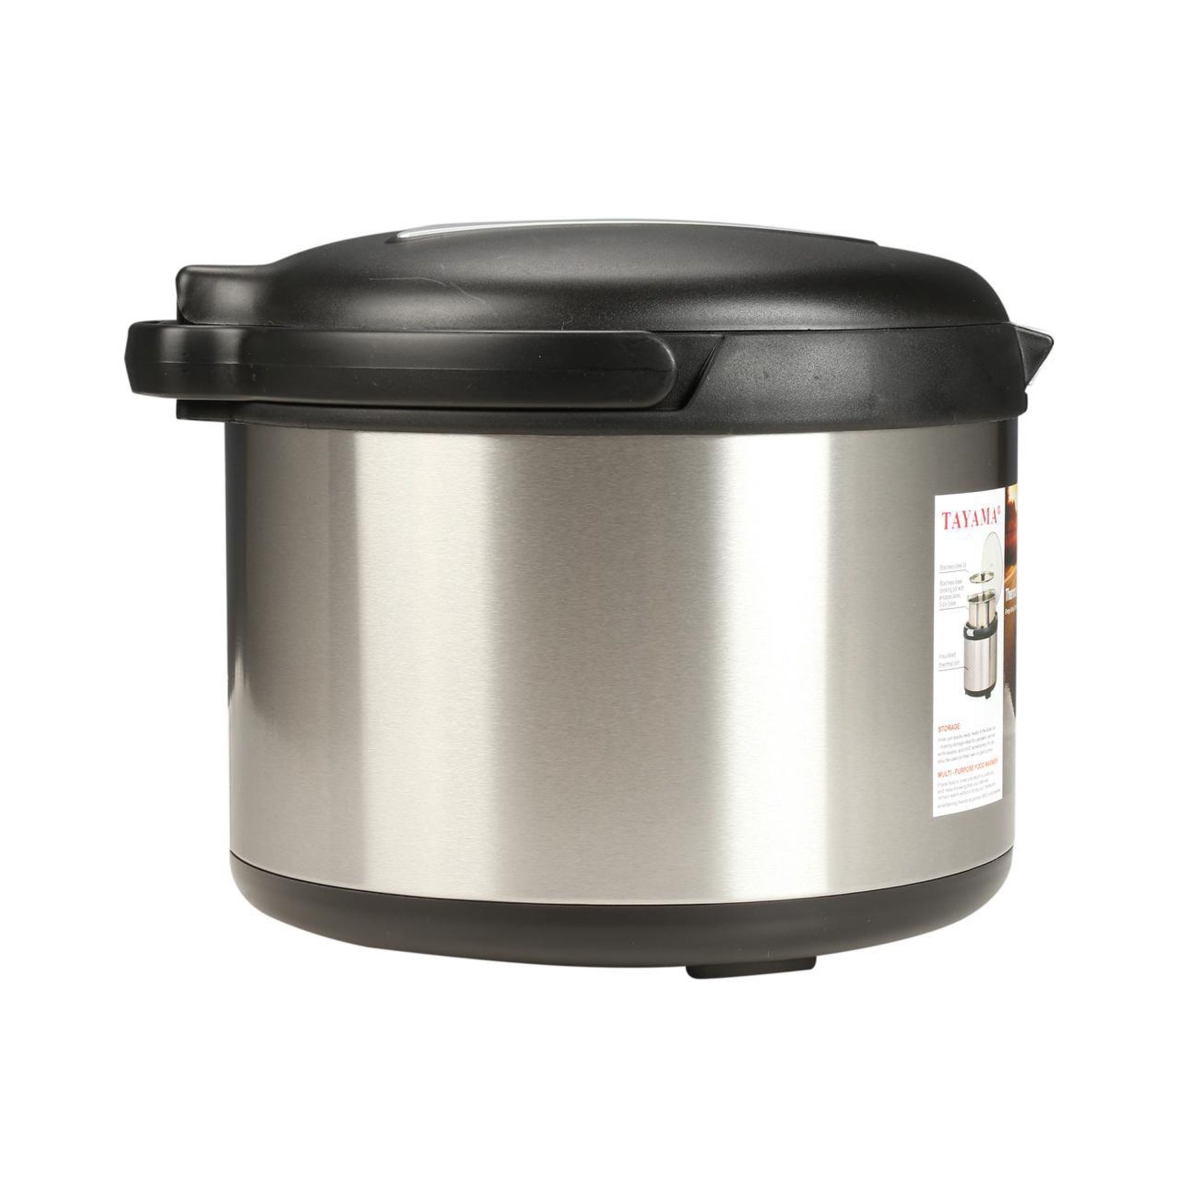 Picture of Tayama TXM-50CFR 5 qt. Energy-Saving Thermal Cooker, Stainless Steel